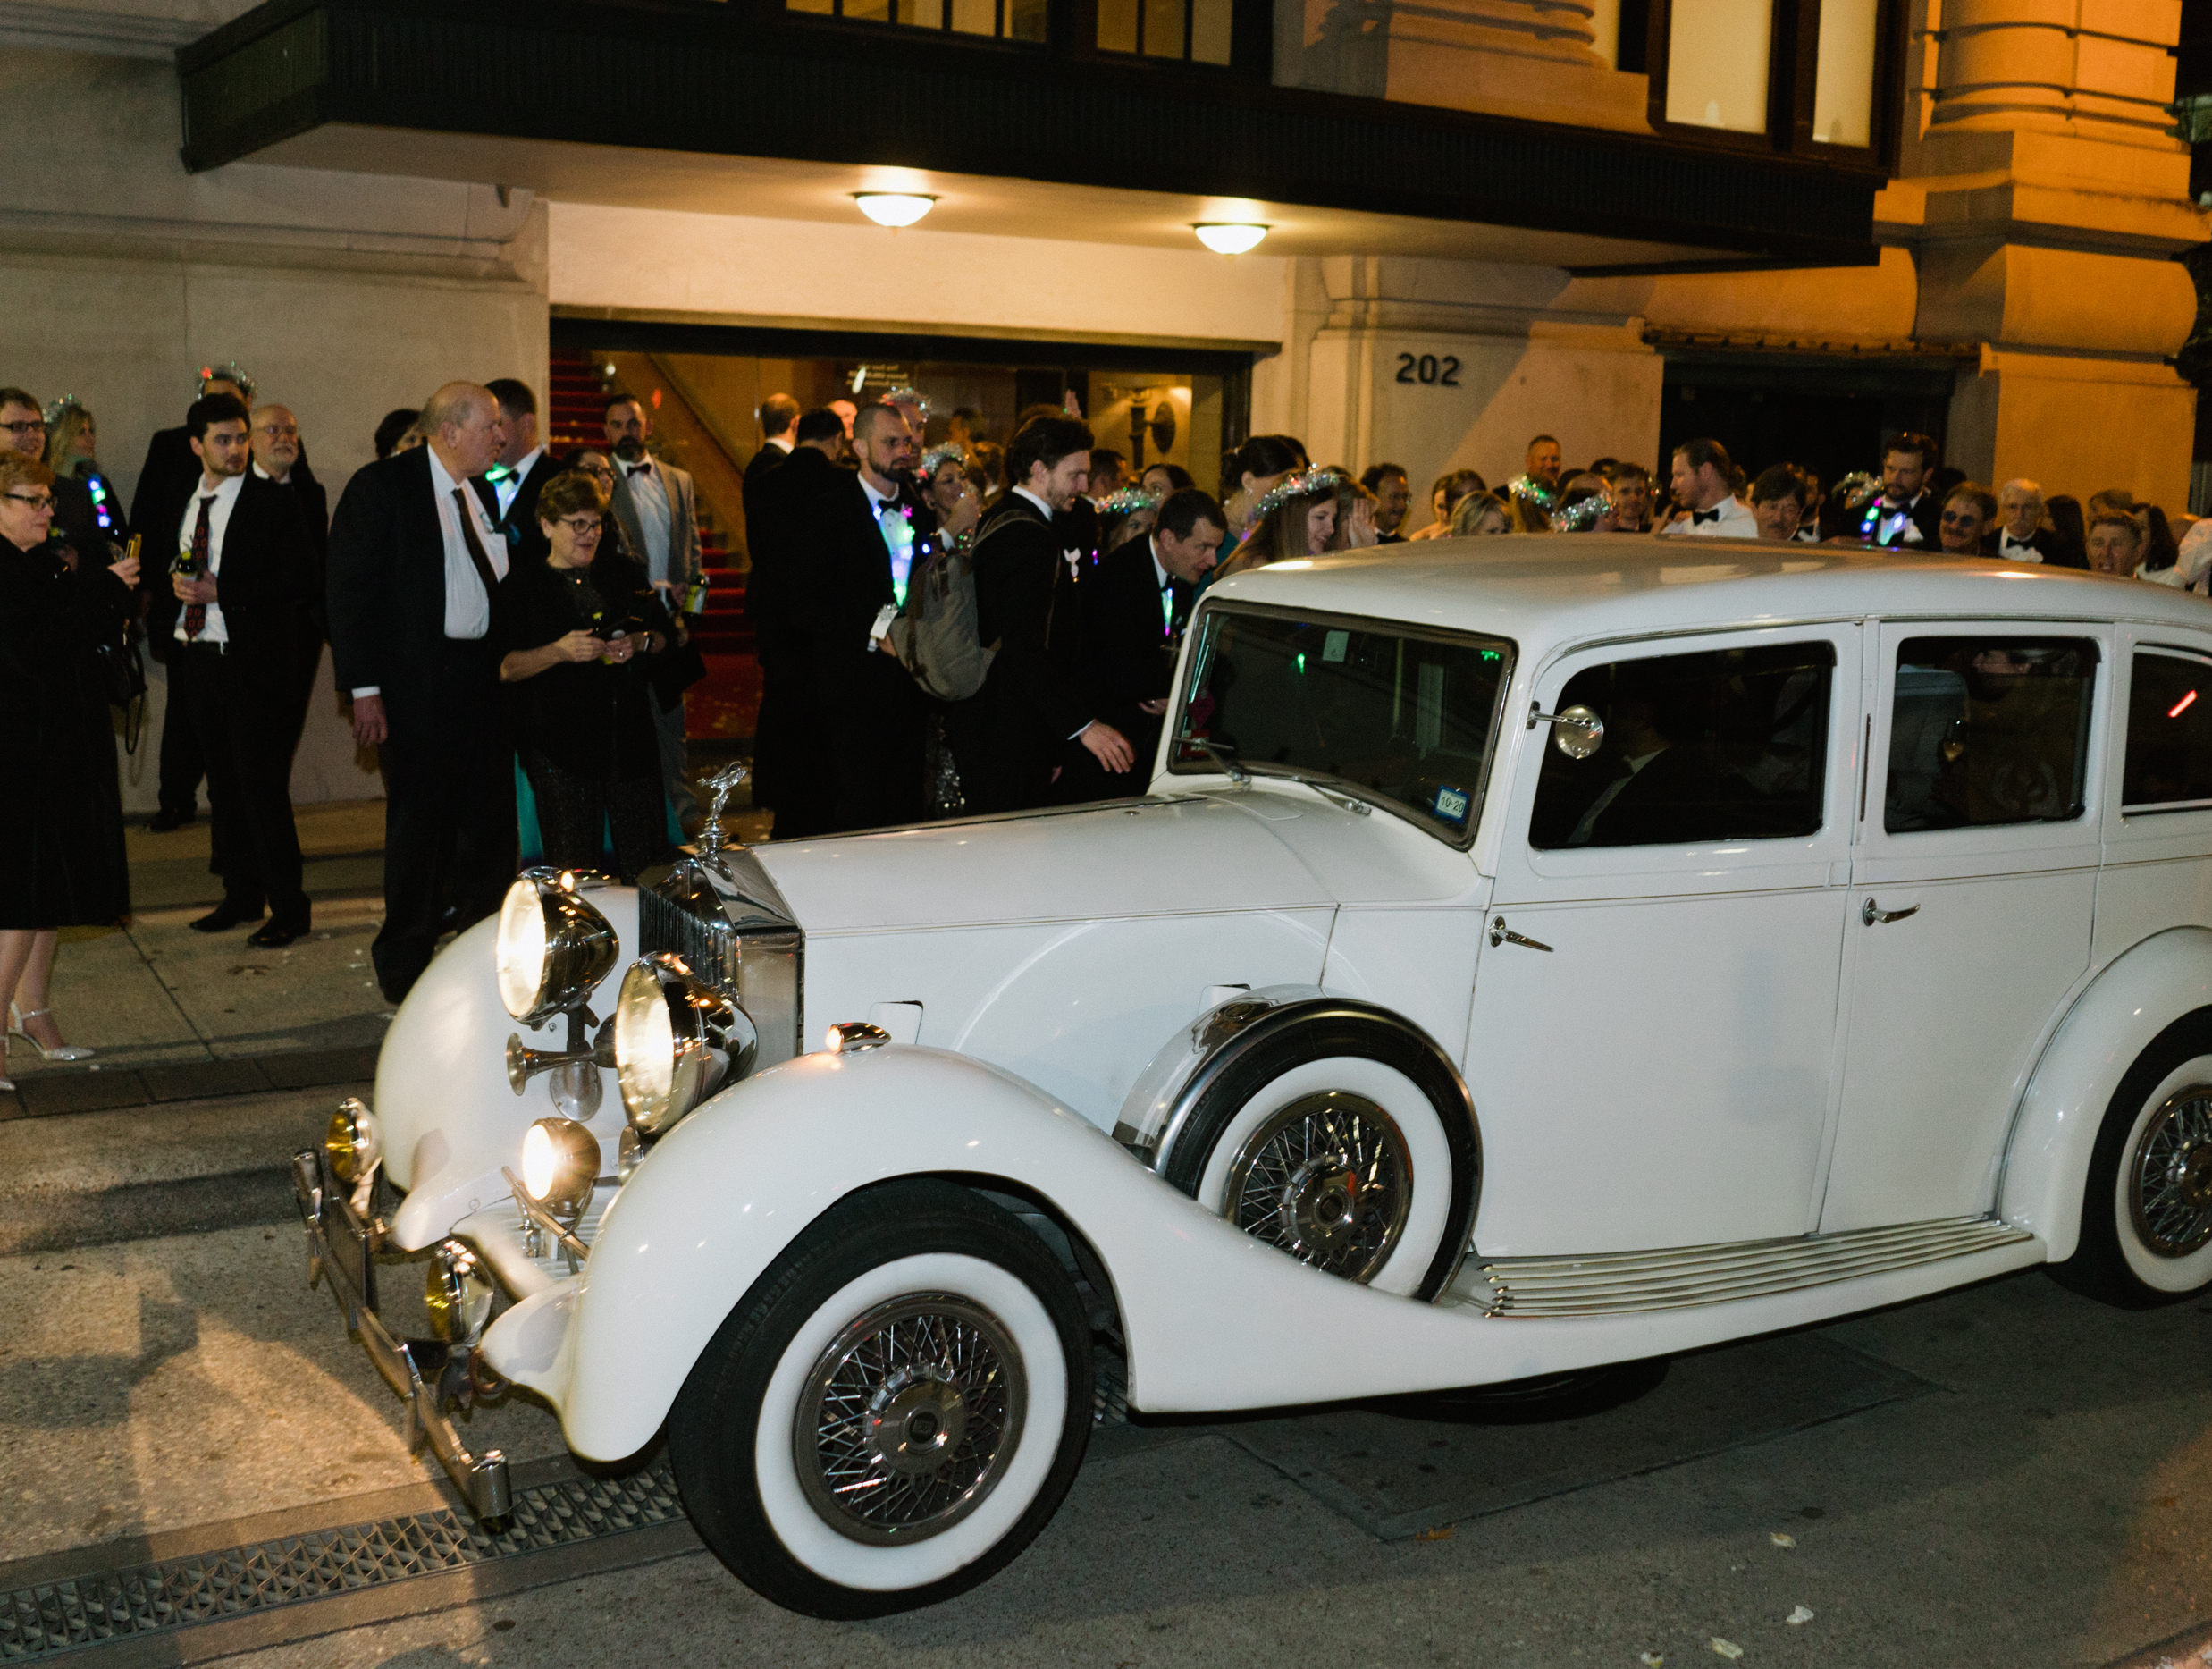 A white vintage car is parked outside of a wedding venue in Houston for a bride and groom to get inside.